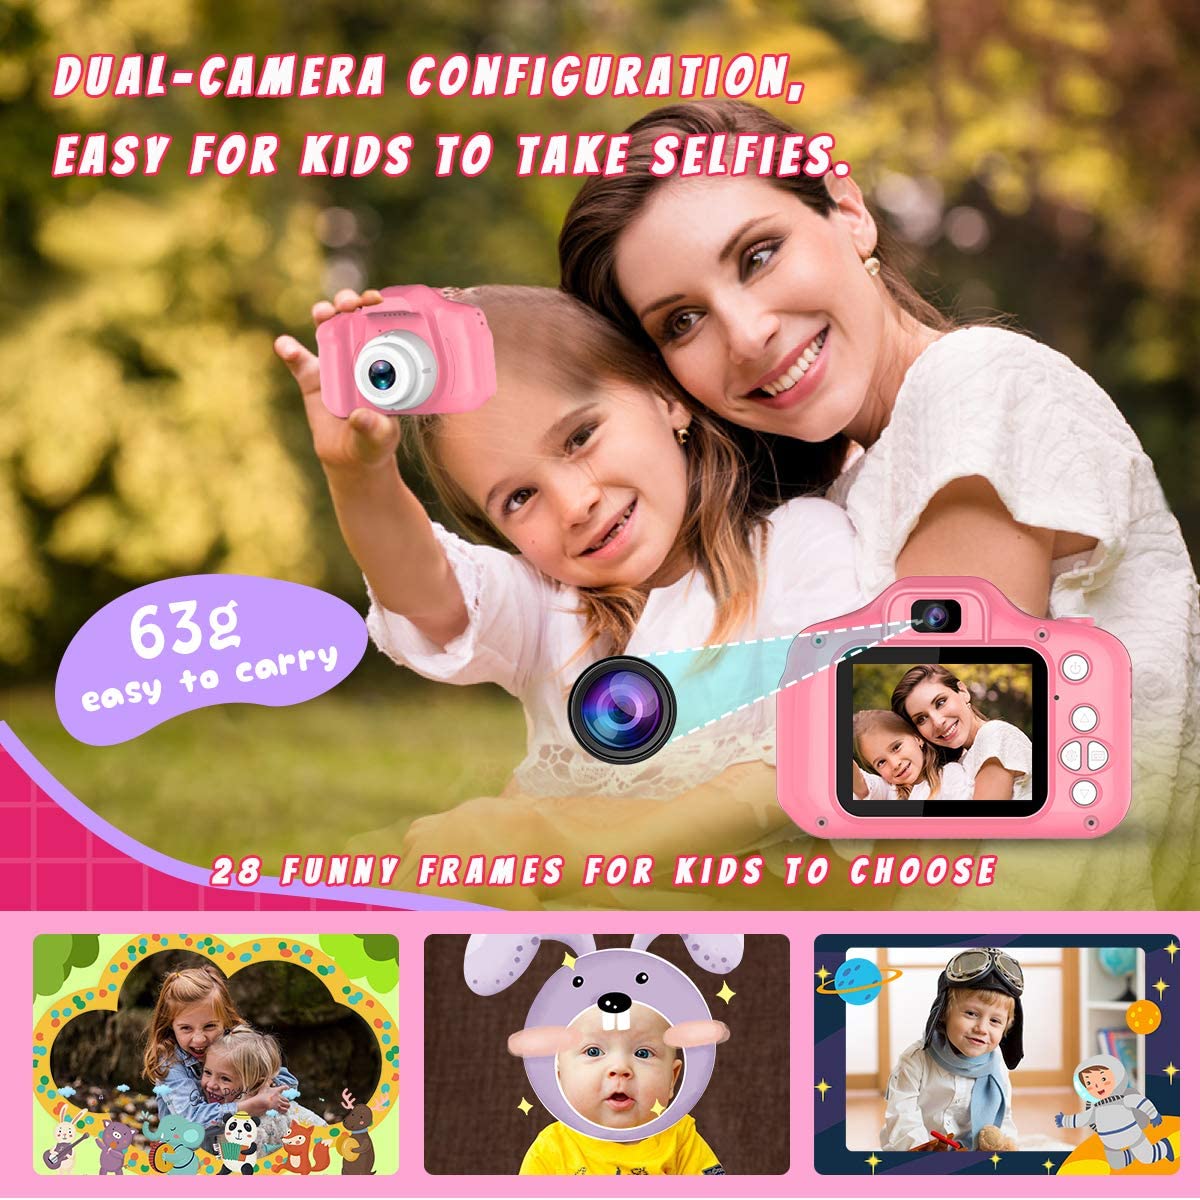 BAISIQI Selfie Cameras for Kids, Toy for 3-8 Year Old Girls Children Digital Cameras with 32 GB Card Video Music Electronic Game Toy Birthday Christmas Idea Gift for Toddler Girls Pink Presents